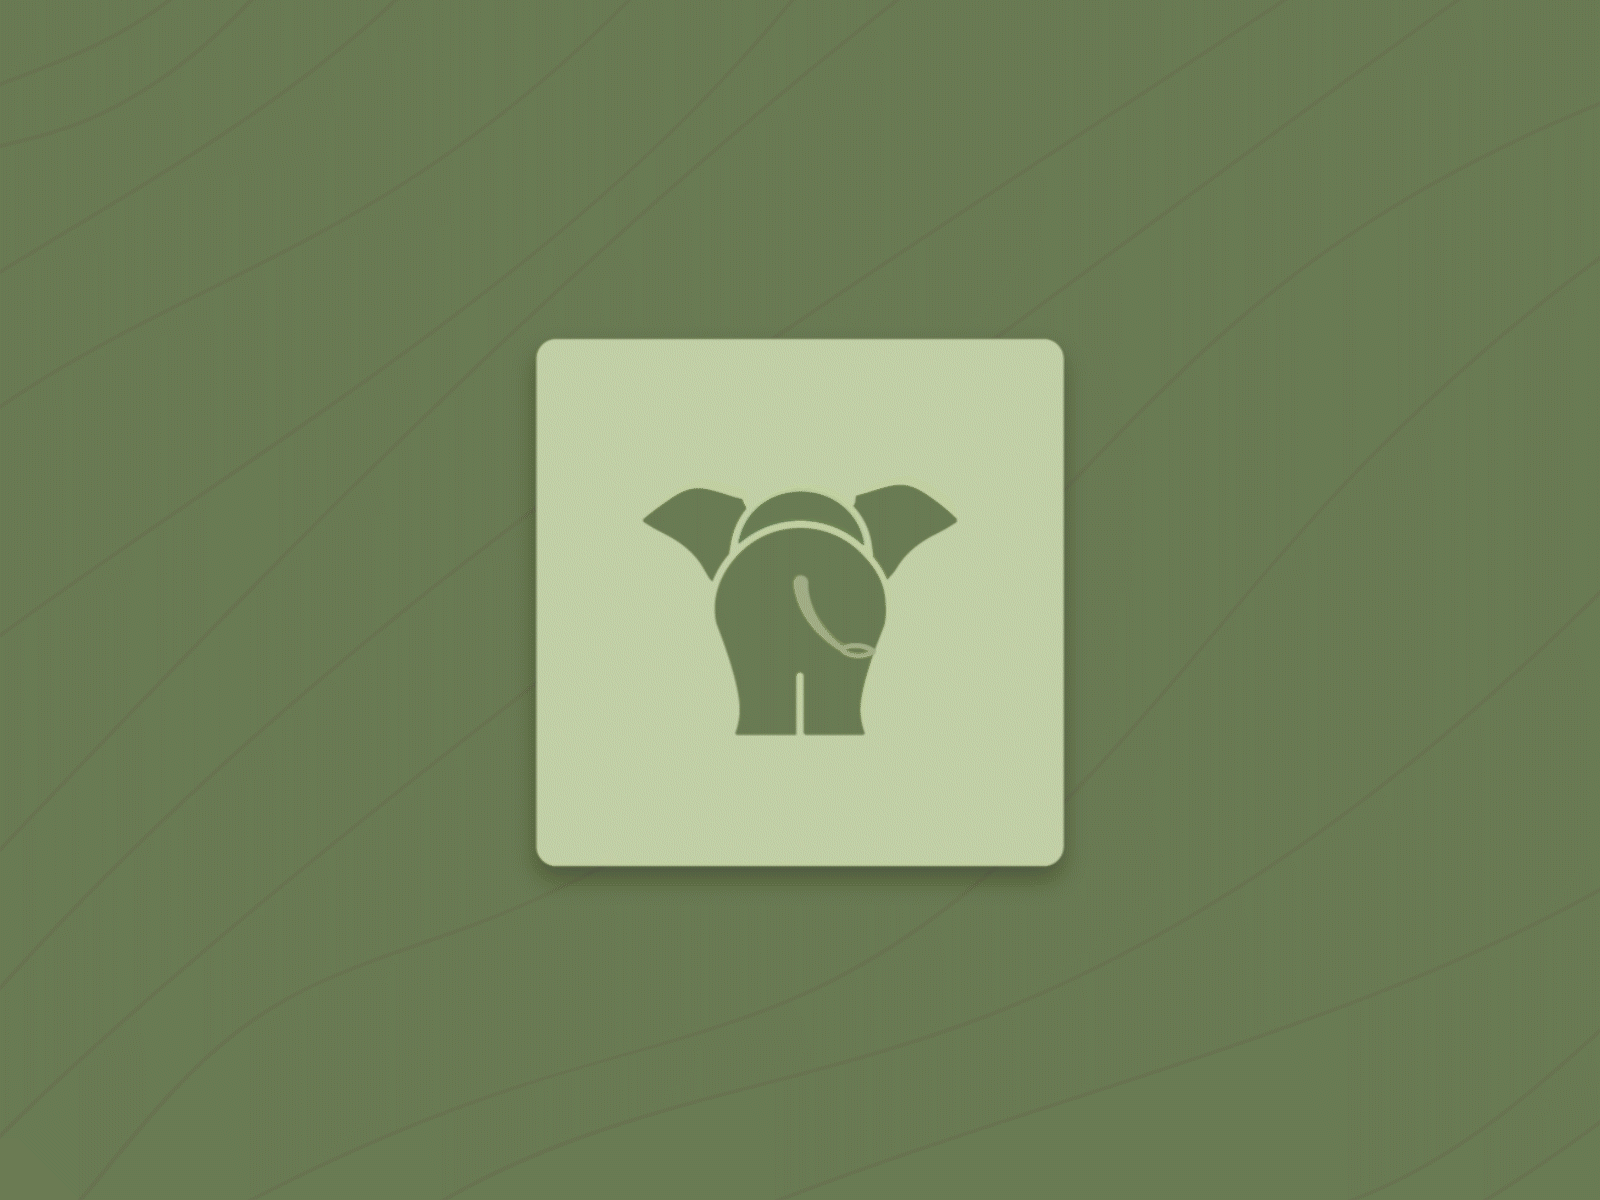 "No Masters Please" aftereffects animation baby baby elephant design elephant flat free gif green icon illustrator minimal tail vector weekly warm up wild wildlife